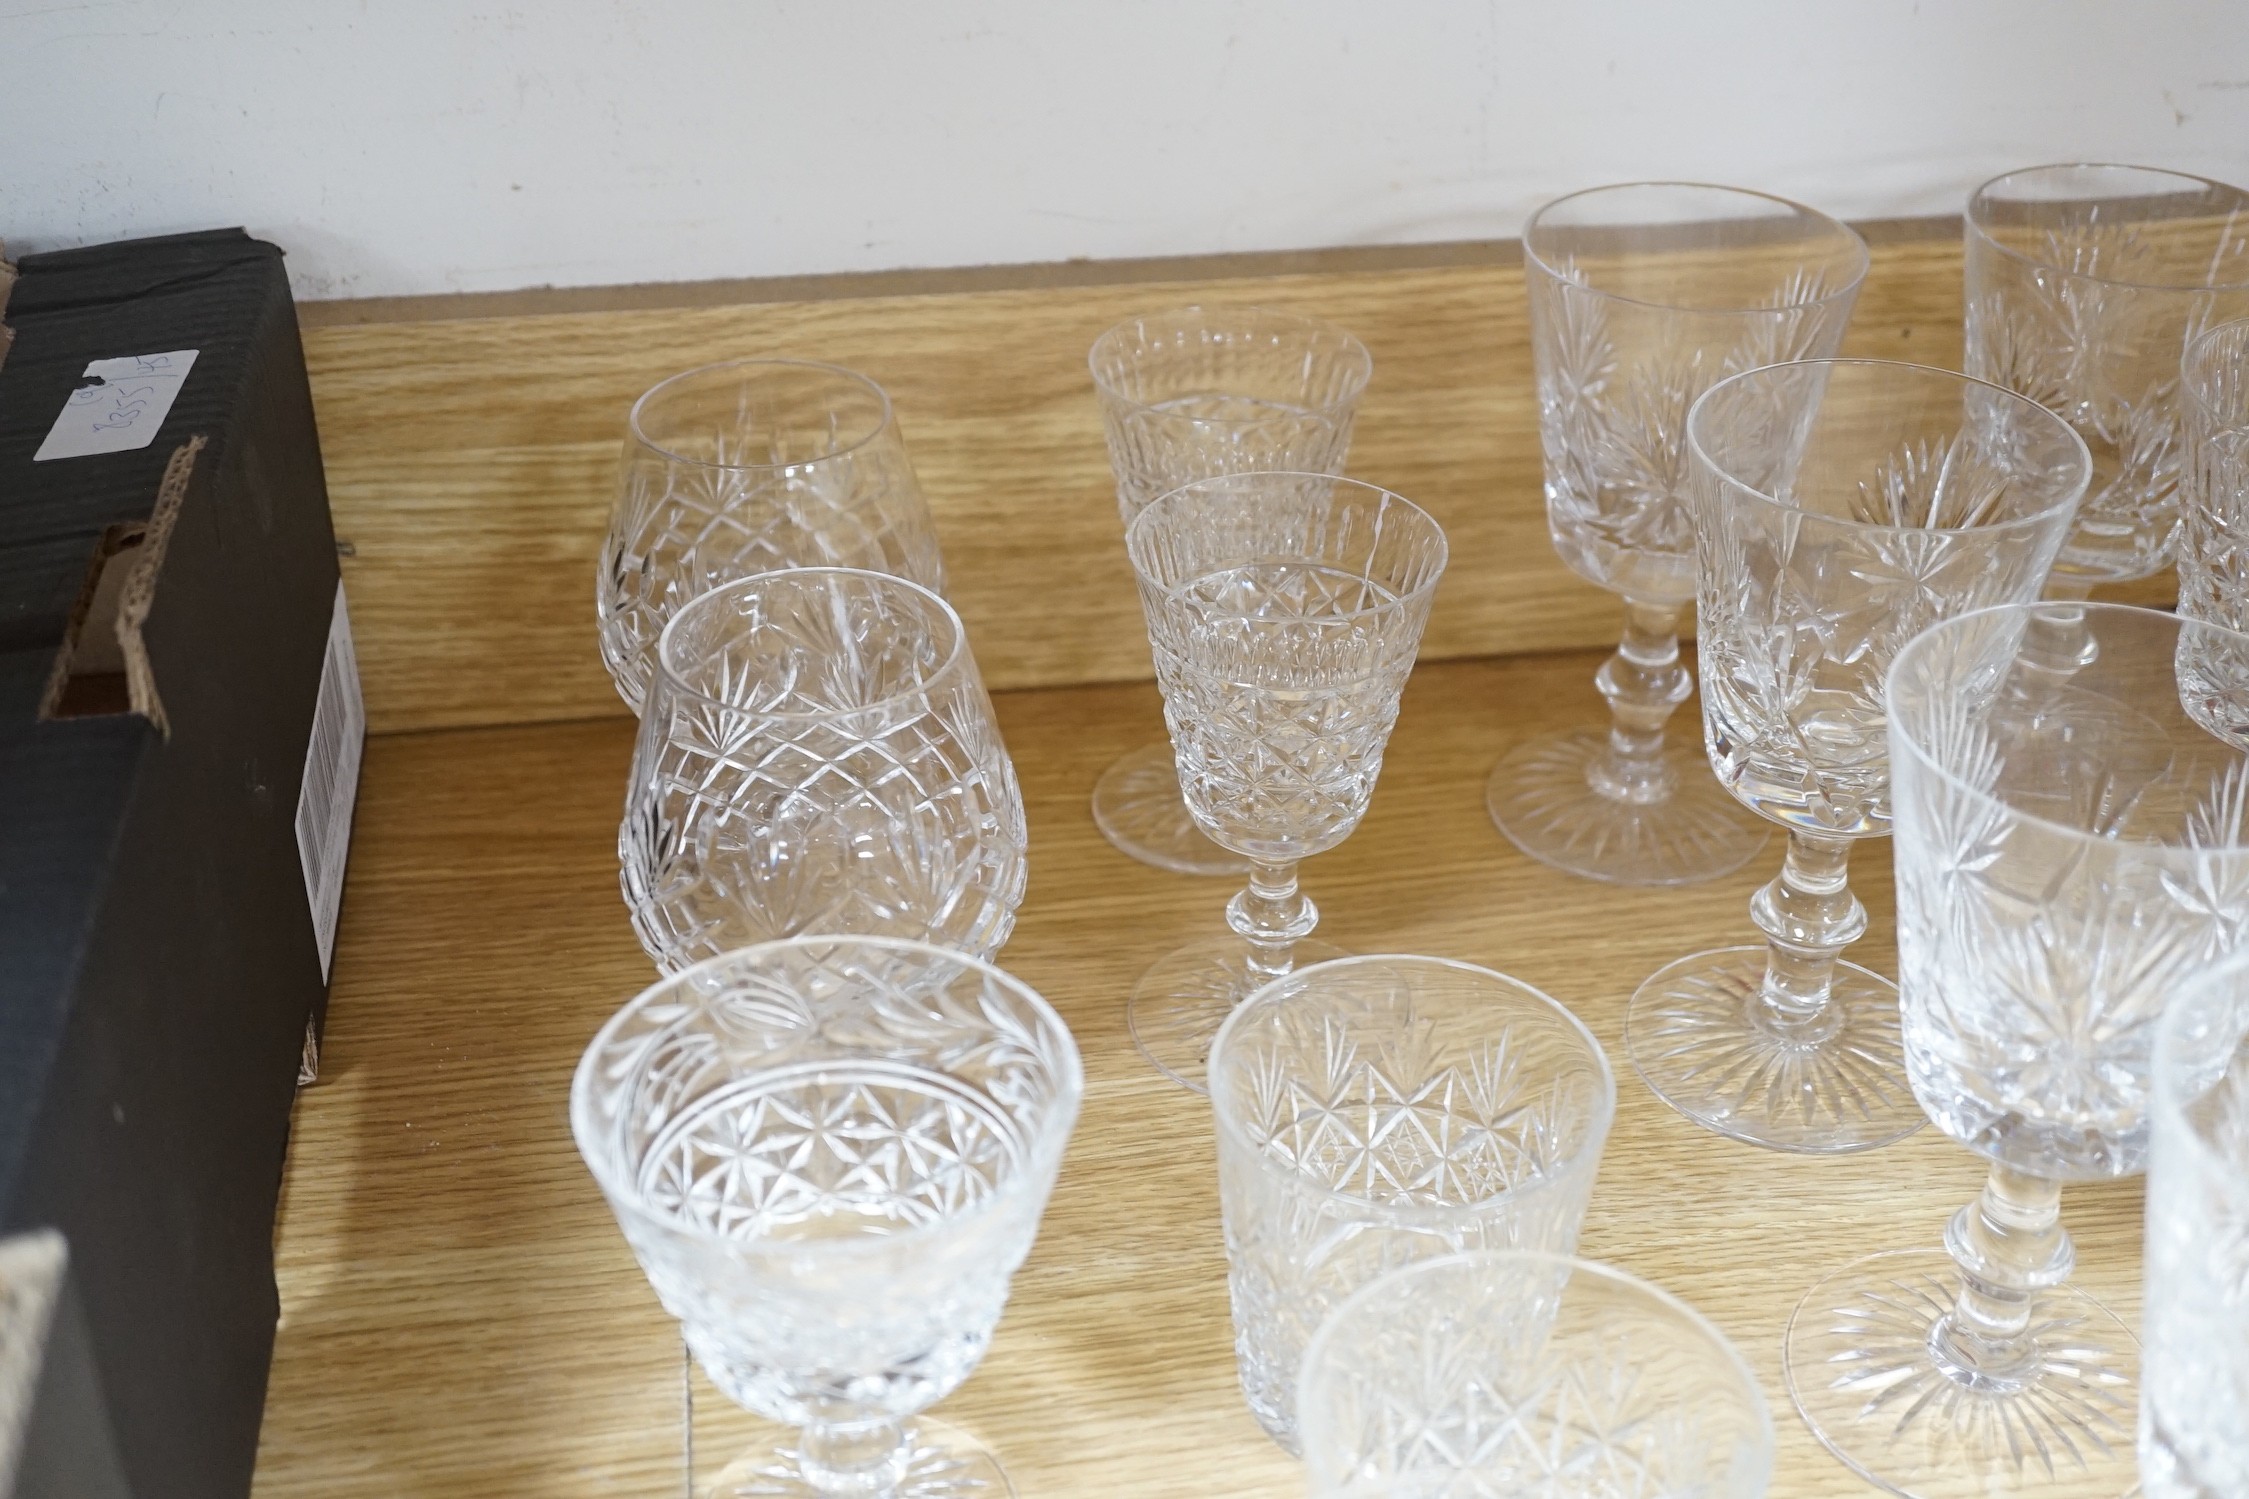 A set of six Edinburgh wine glasses, together with other mixed part-sets of glasses